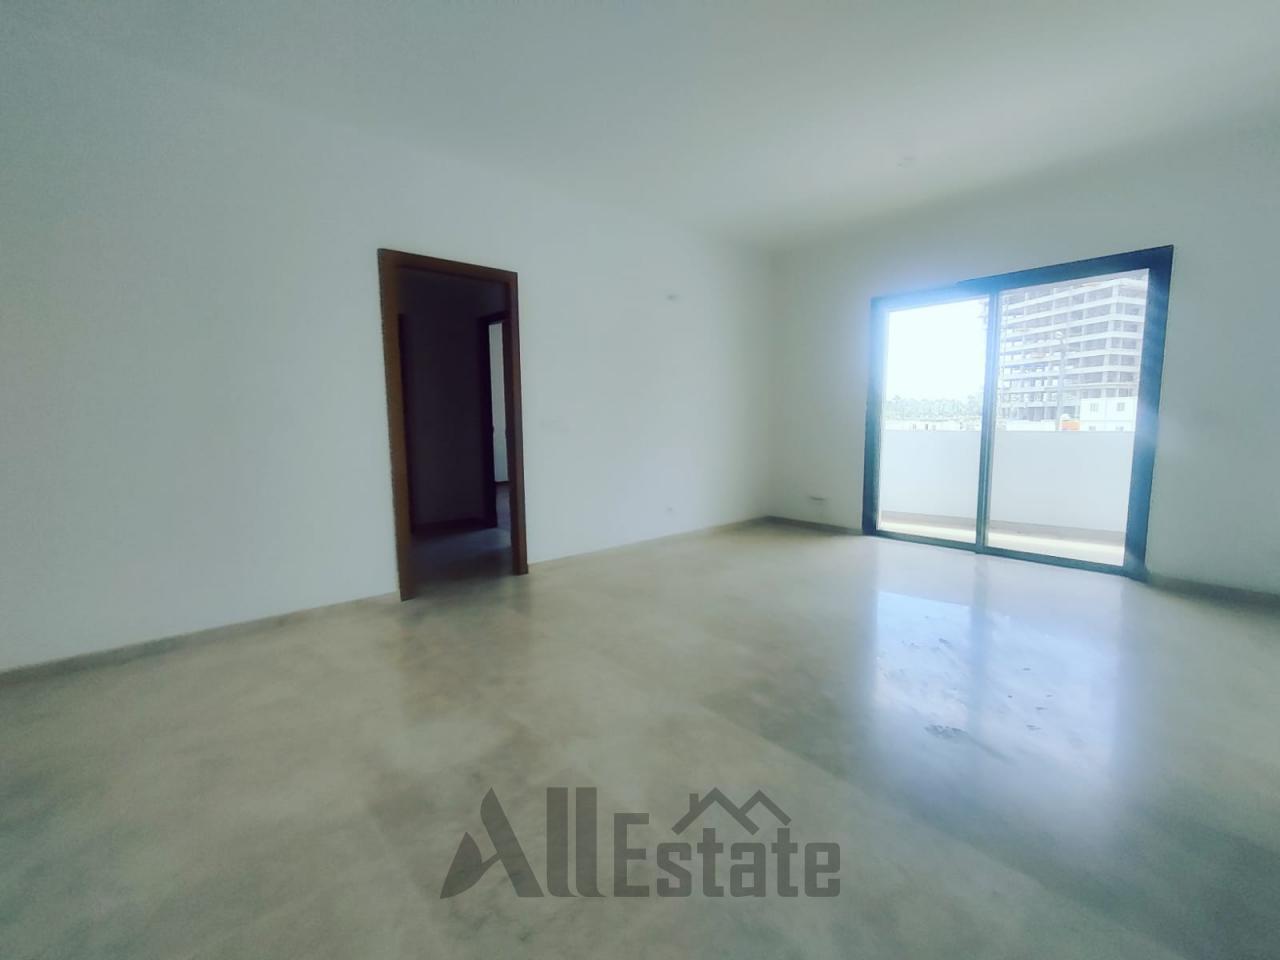 Rent this apartment in Casablanca Finance City. Small area 110 m².